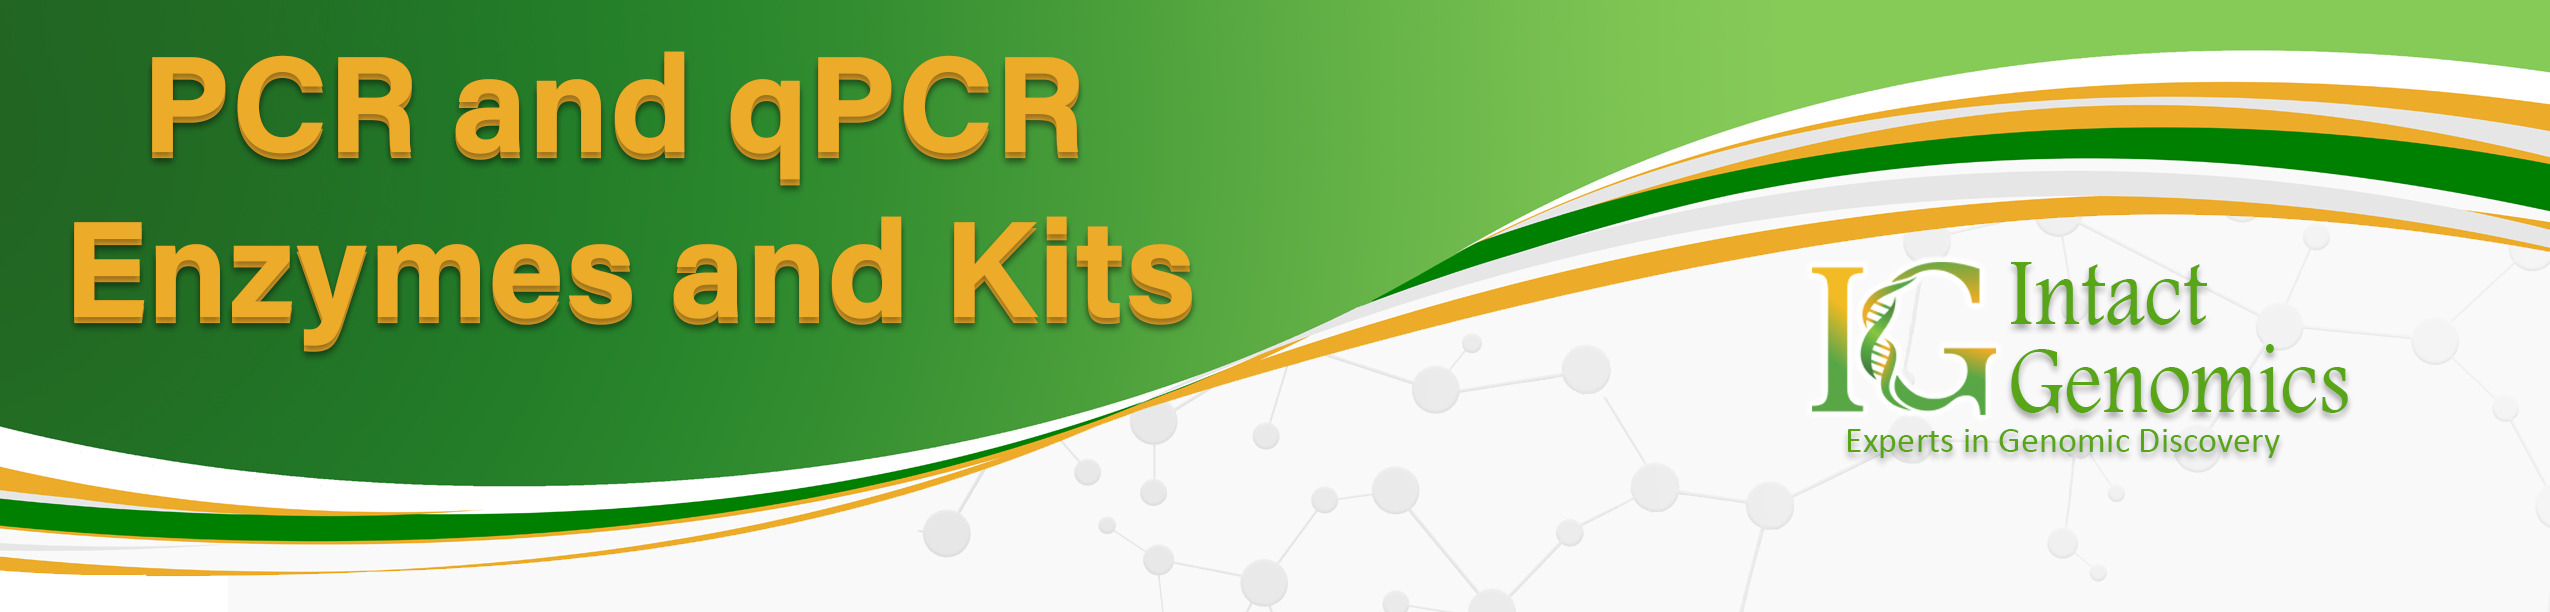 PCR and qPCR Enzymes and Kits